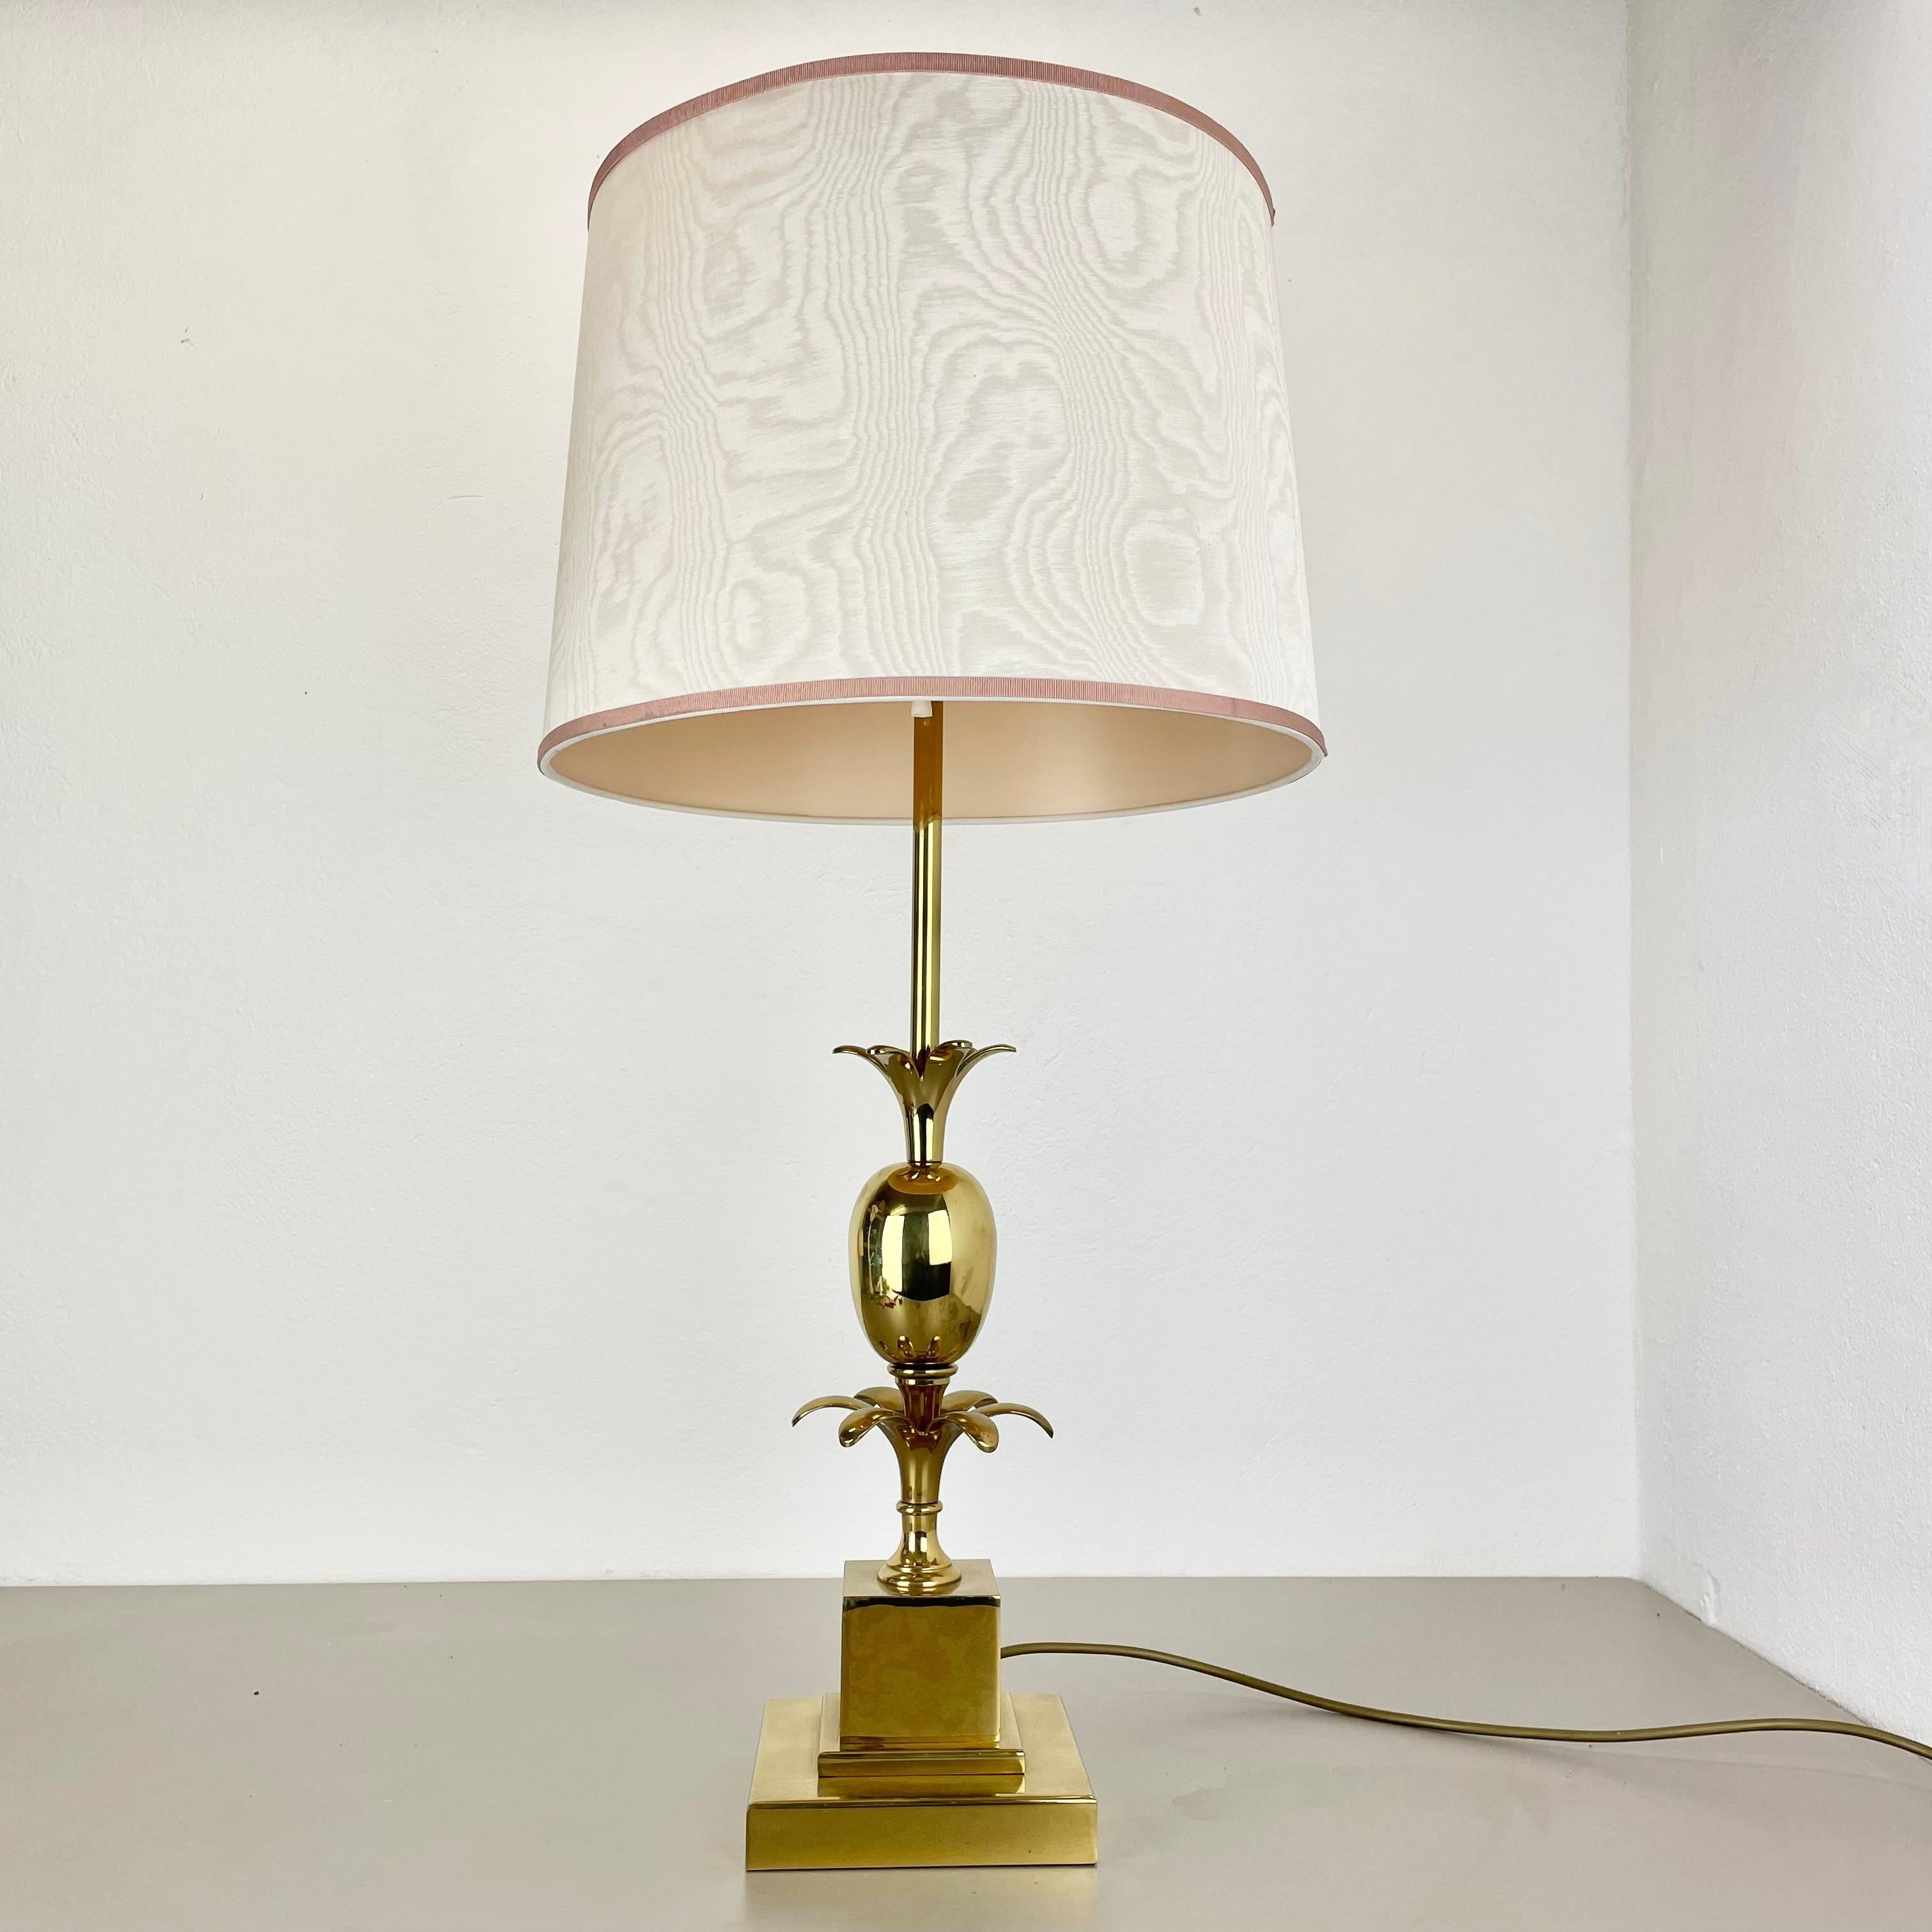 Article: unique hollywood regency table light

Origin: France

Design producer: in style of MAISON CHARLES

Material: brass, metal, fabric

Decade: 1970s

Description: This original vintage table light, was produced in the 1970s in France. it is in